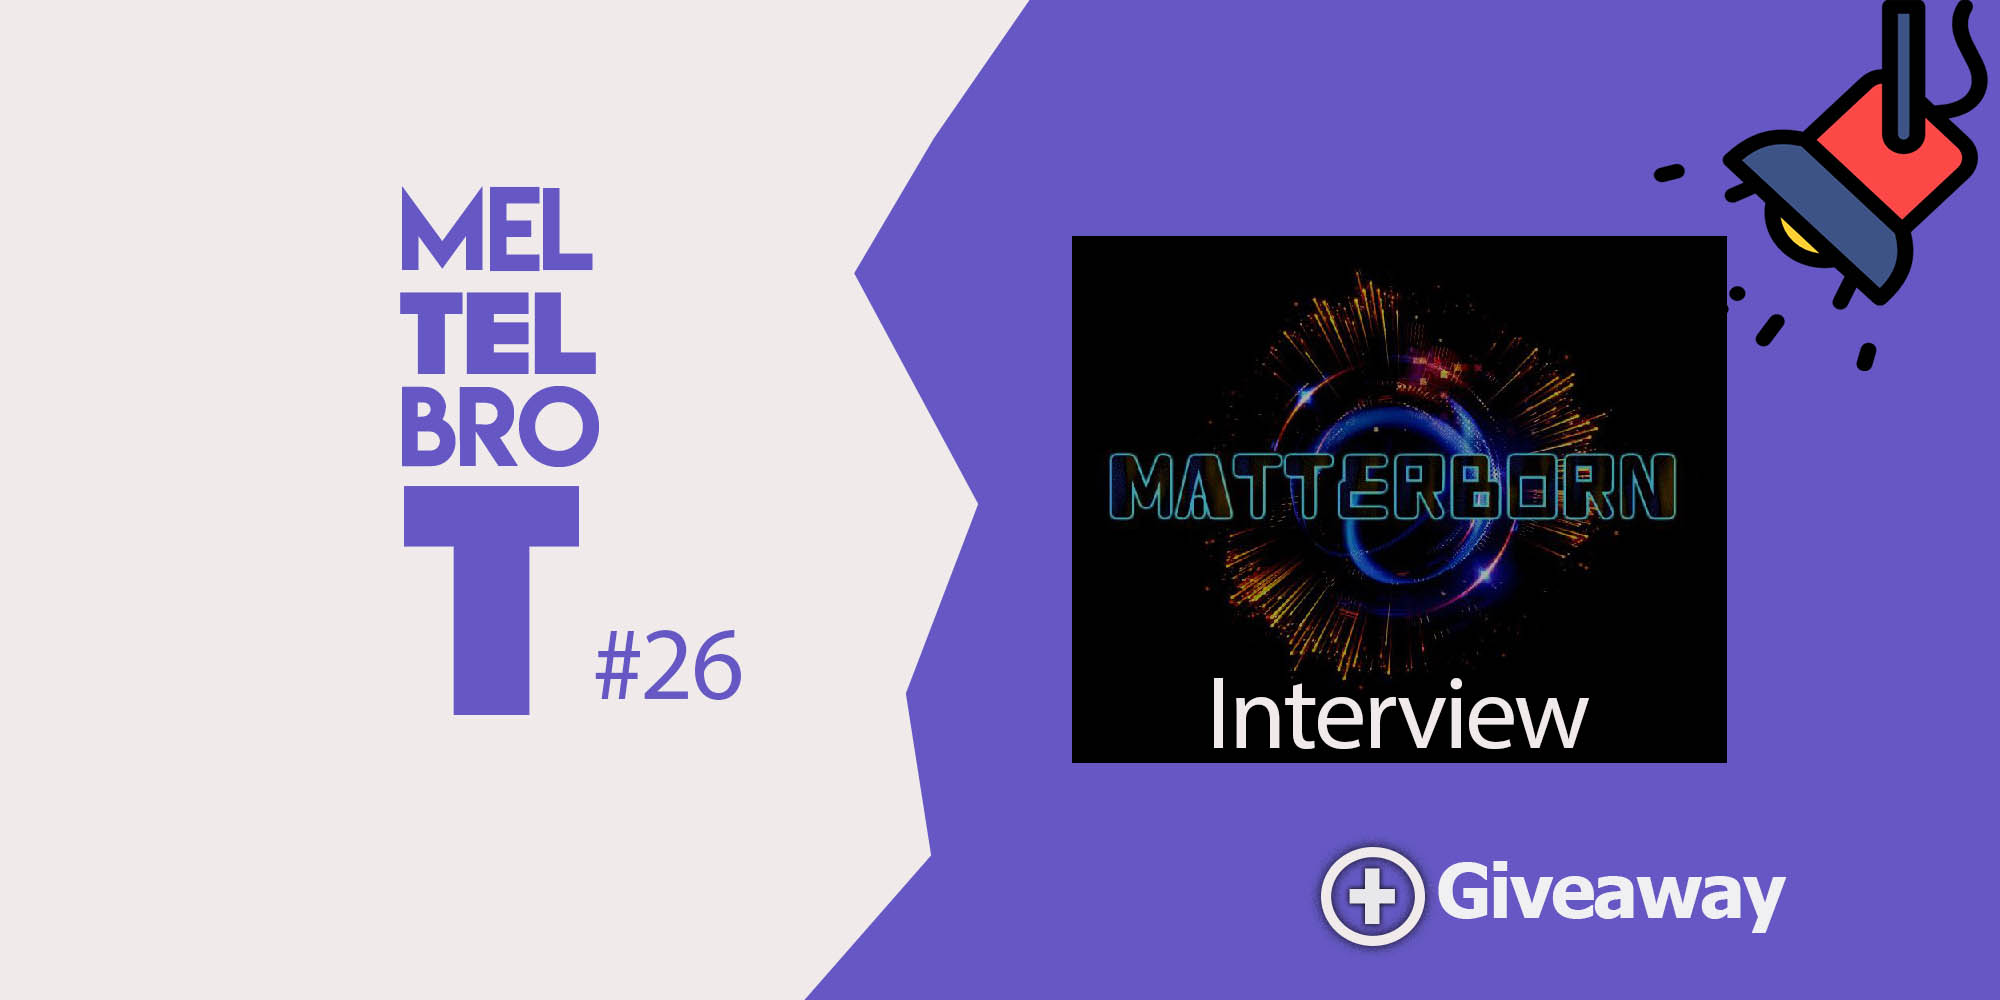 matterborn meltelbrot26 Today I’m chatting with EnjinBae, developer of the project Matterborn, a SCI-FI trading card game, using Enerjie and "Architects" to deplete your opponent's momentum (health) and is using the Dapp functionality of the Enjin wallet. I first chatted with EnjinBae when I used one of his cool Enjin Fan art pieces for a previous article, I’ve seen more of his developing work since his collaboration with Multiverse101. Seems fitting that we have a look into what EnjinBae is up to, as his project, Matterborn, looks to have some very interesting functionality.